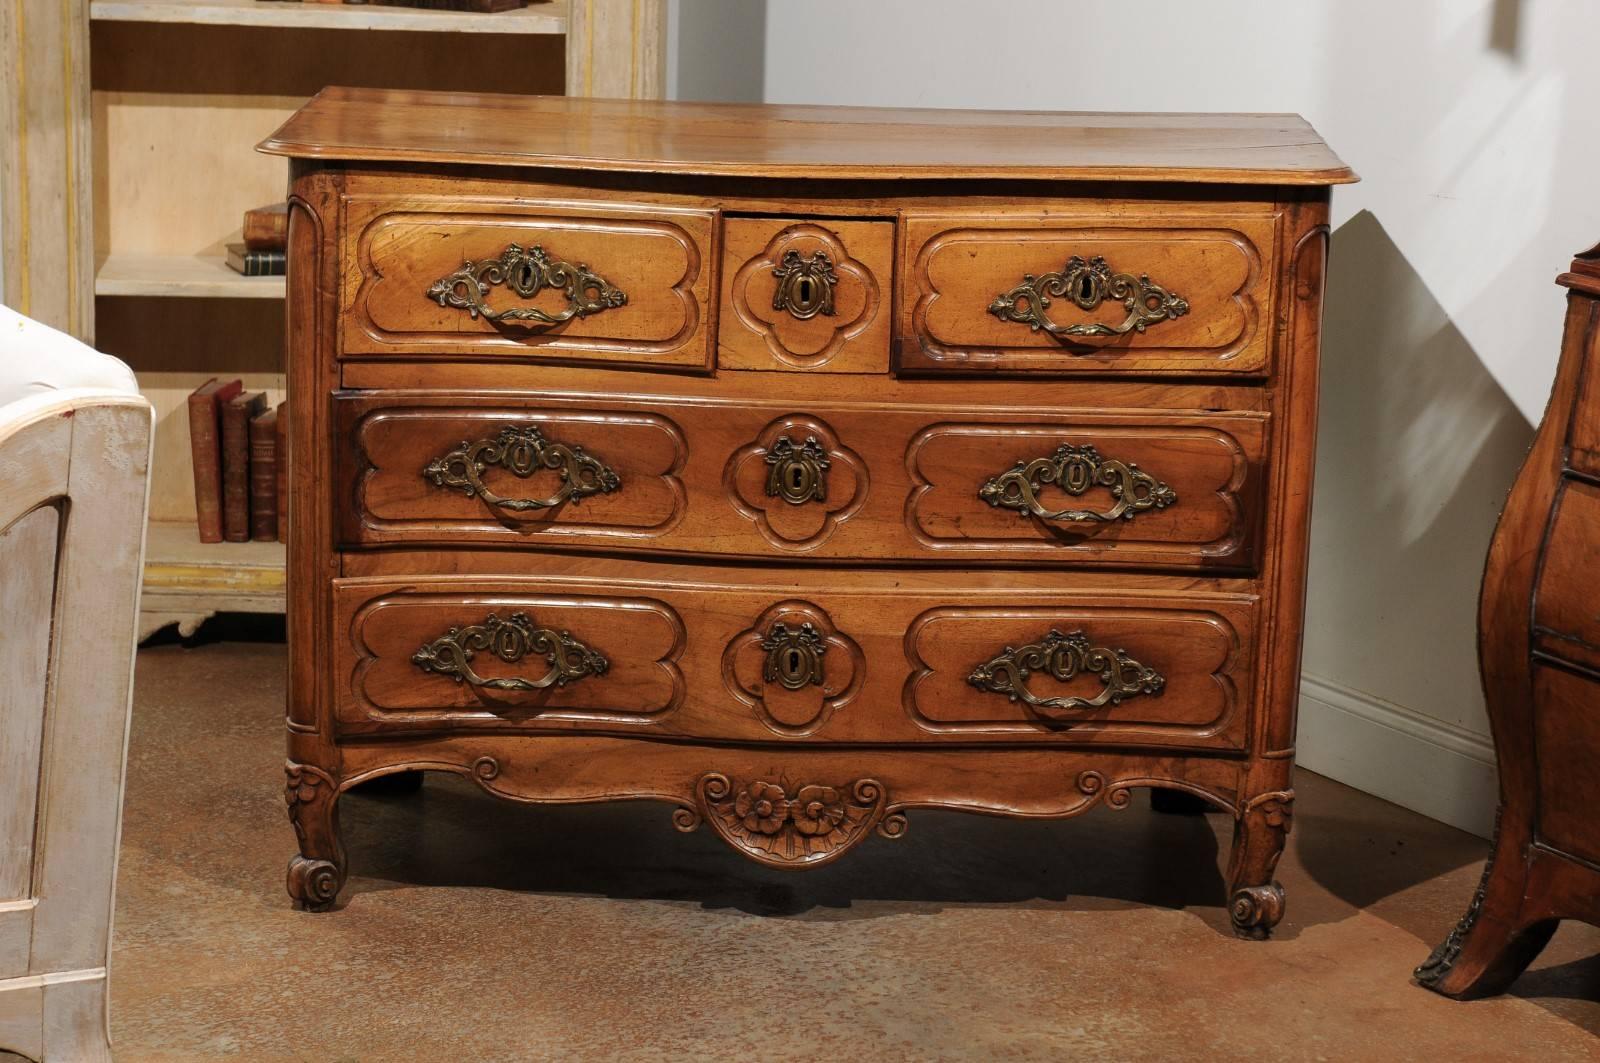 A French Louis XV period walnut five-drawer commode from the mid-18th century, with serpentine front. Born in the early part of the reign of King Louis XV, this French walnut commode features a planked top with beveled edges, sitting above five